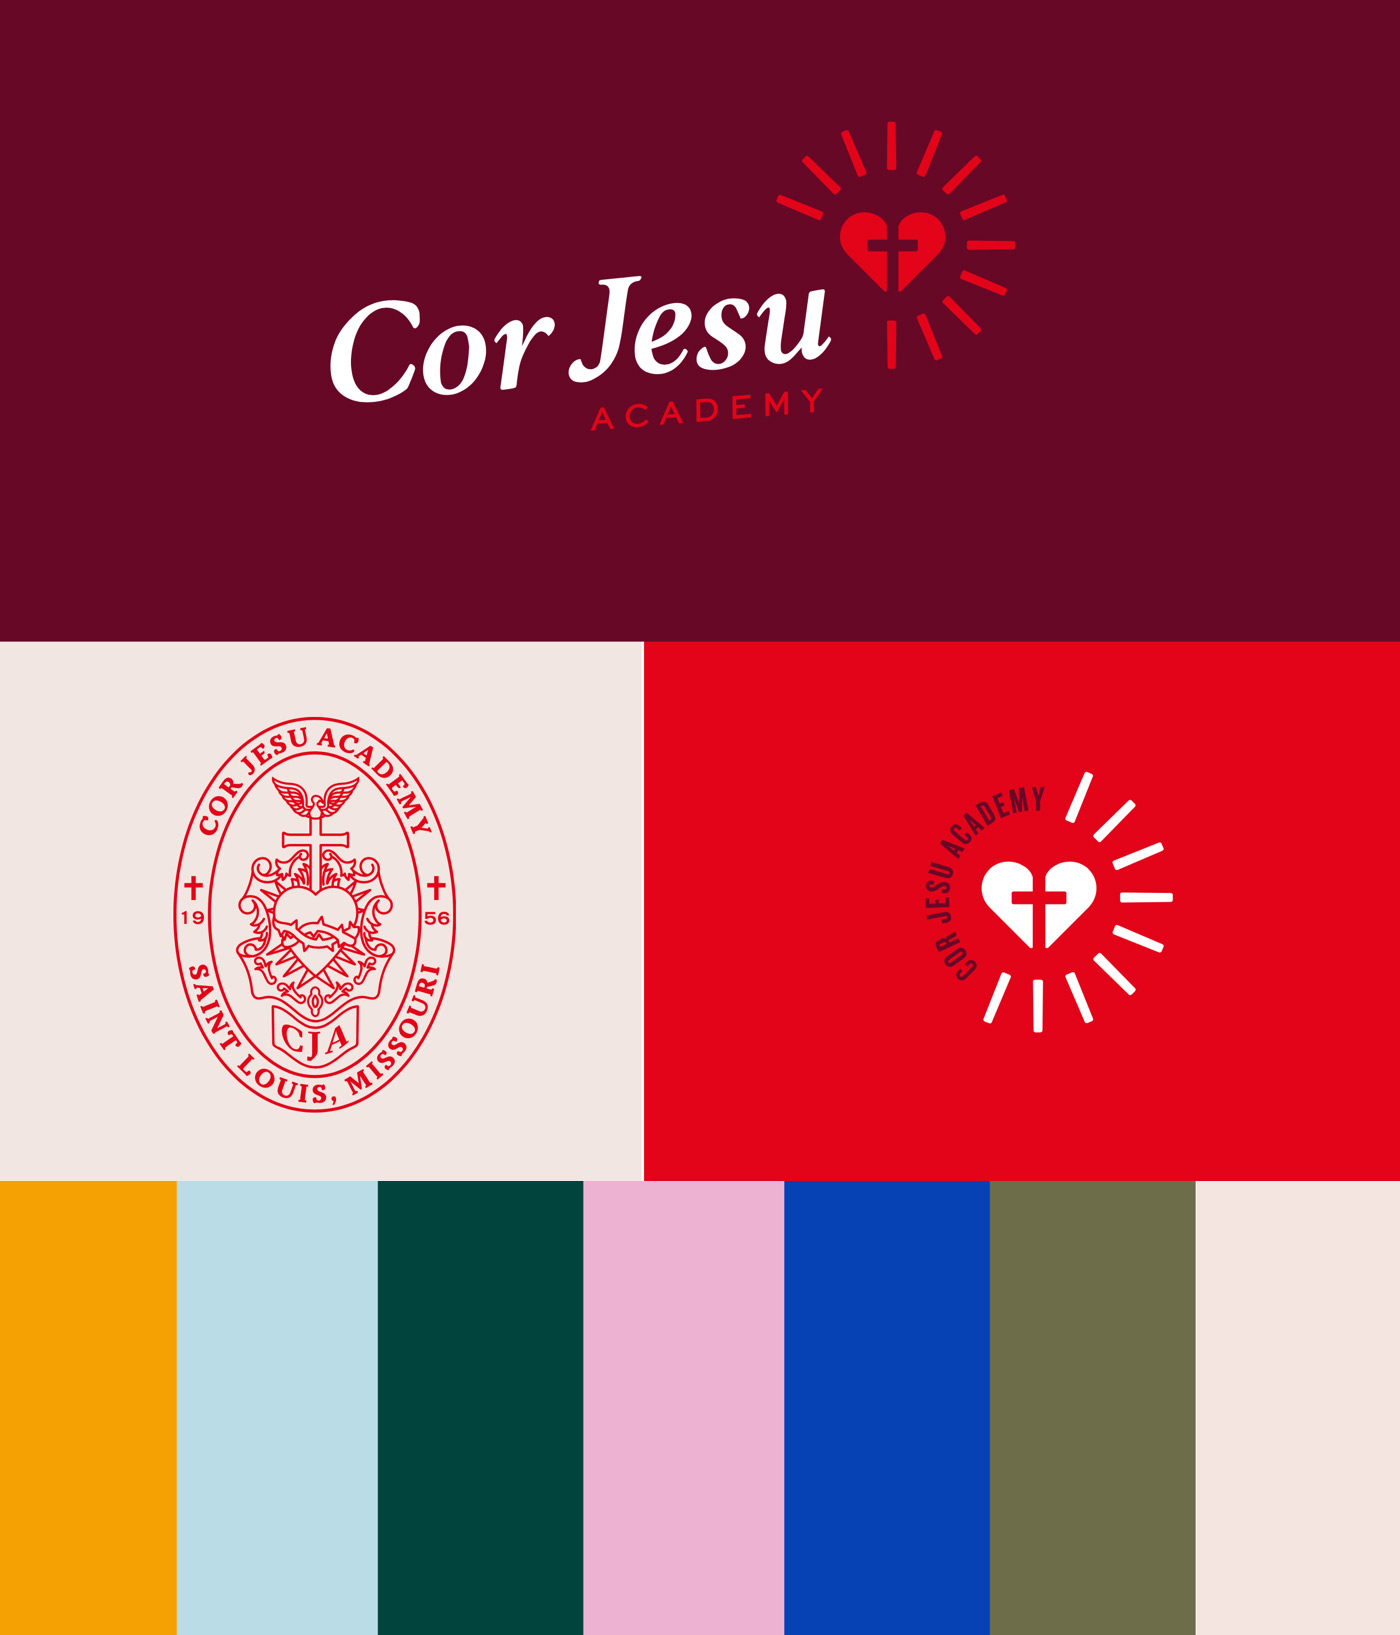 The new brand identity for Cor Jesu Academy, including a refreshed logo, logo mark and color palette